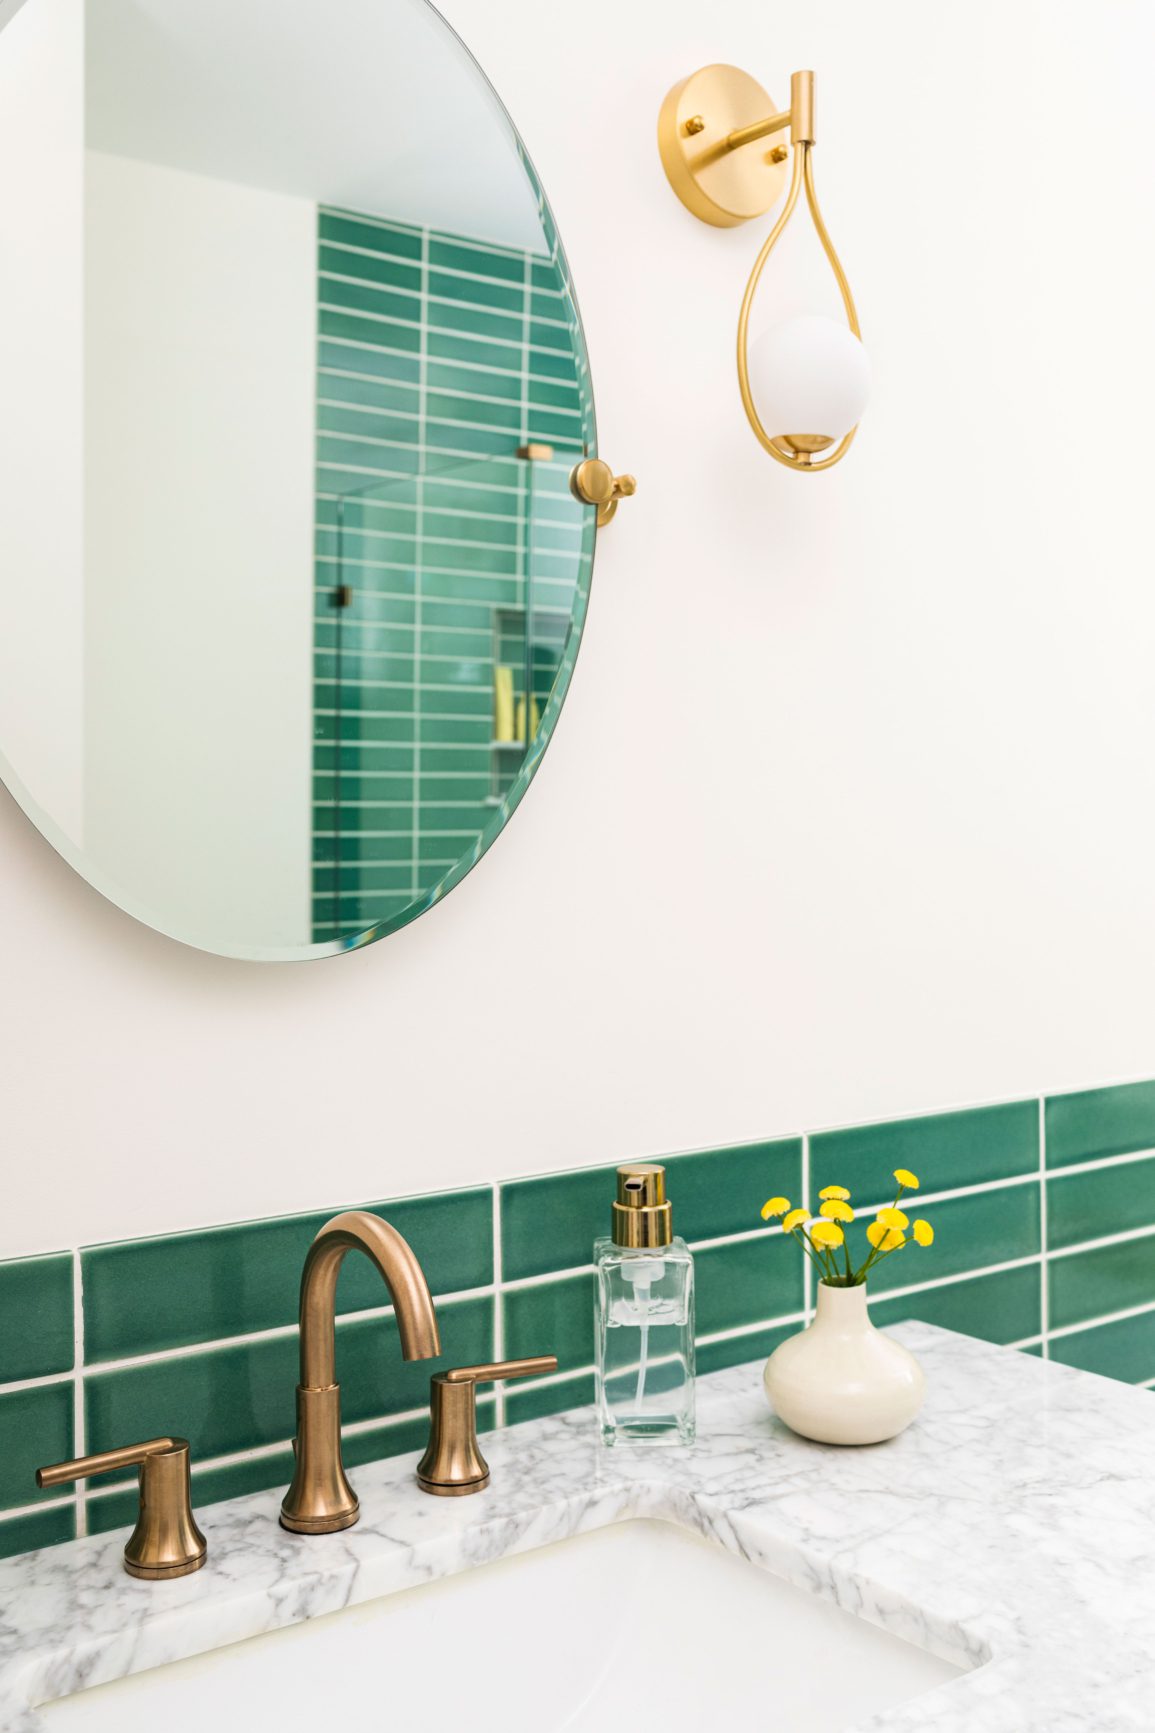 Green tiled bathroom with sconce